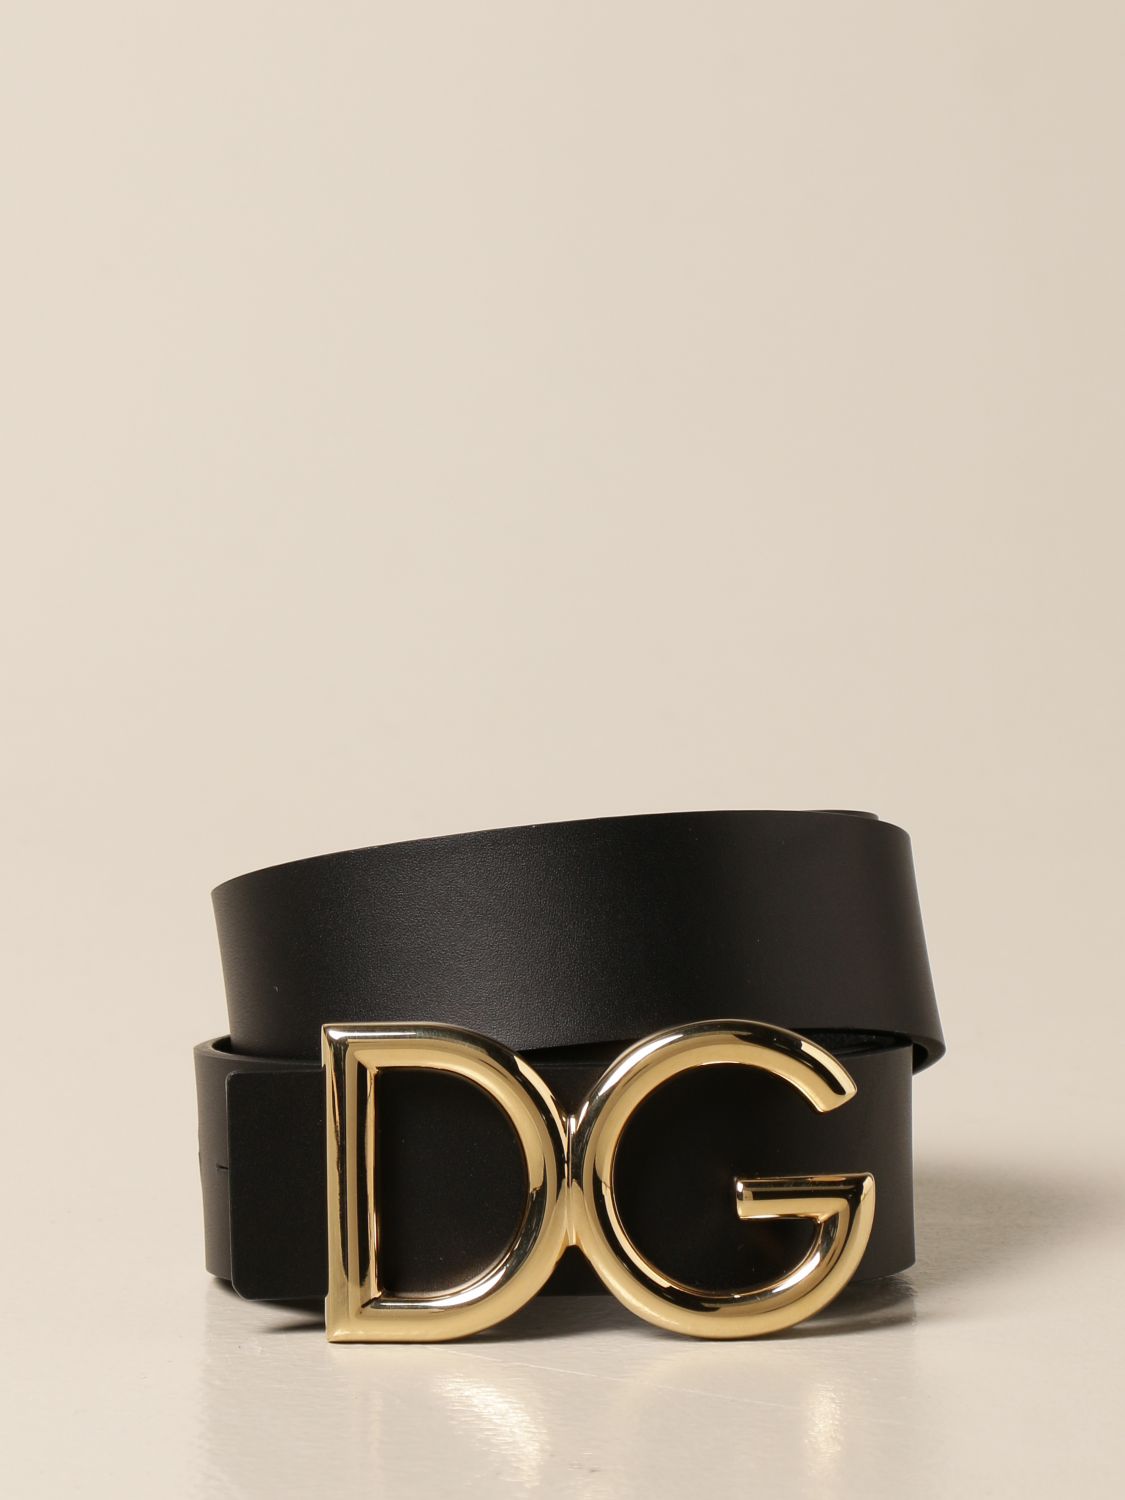 Dolce & Gabbana leather belt with logo buckle